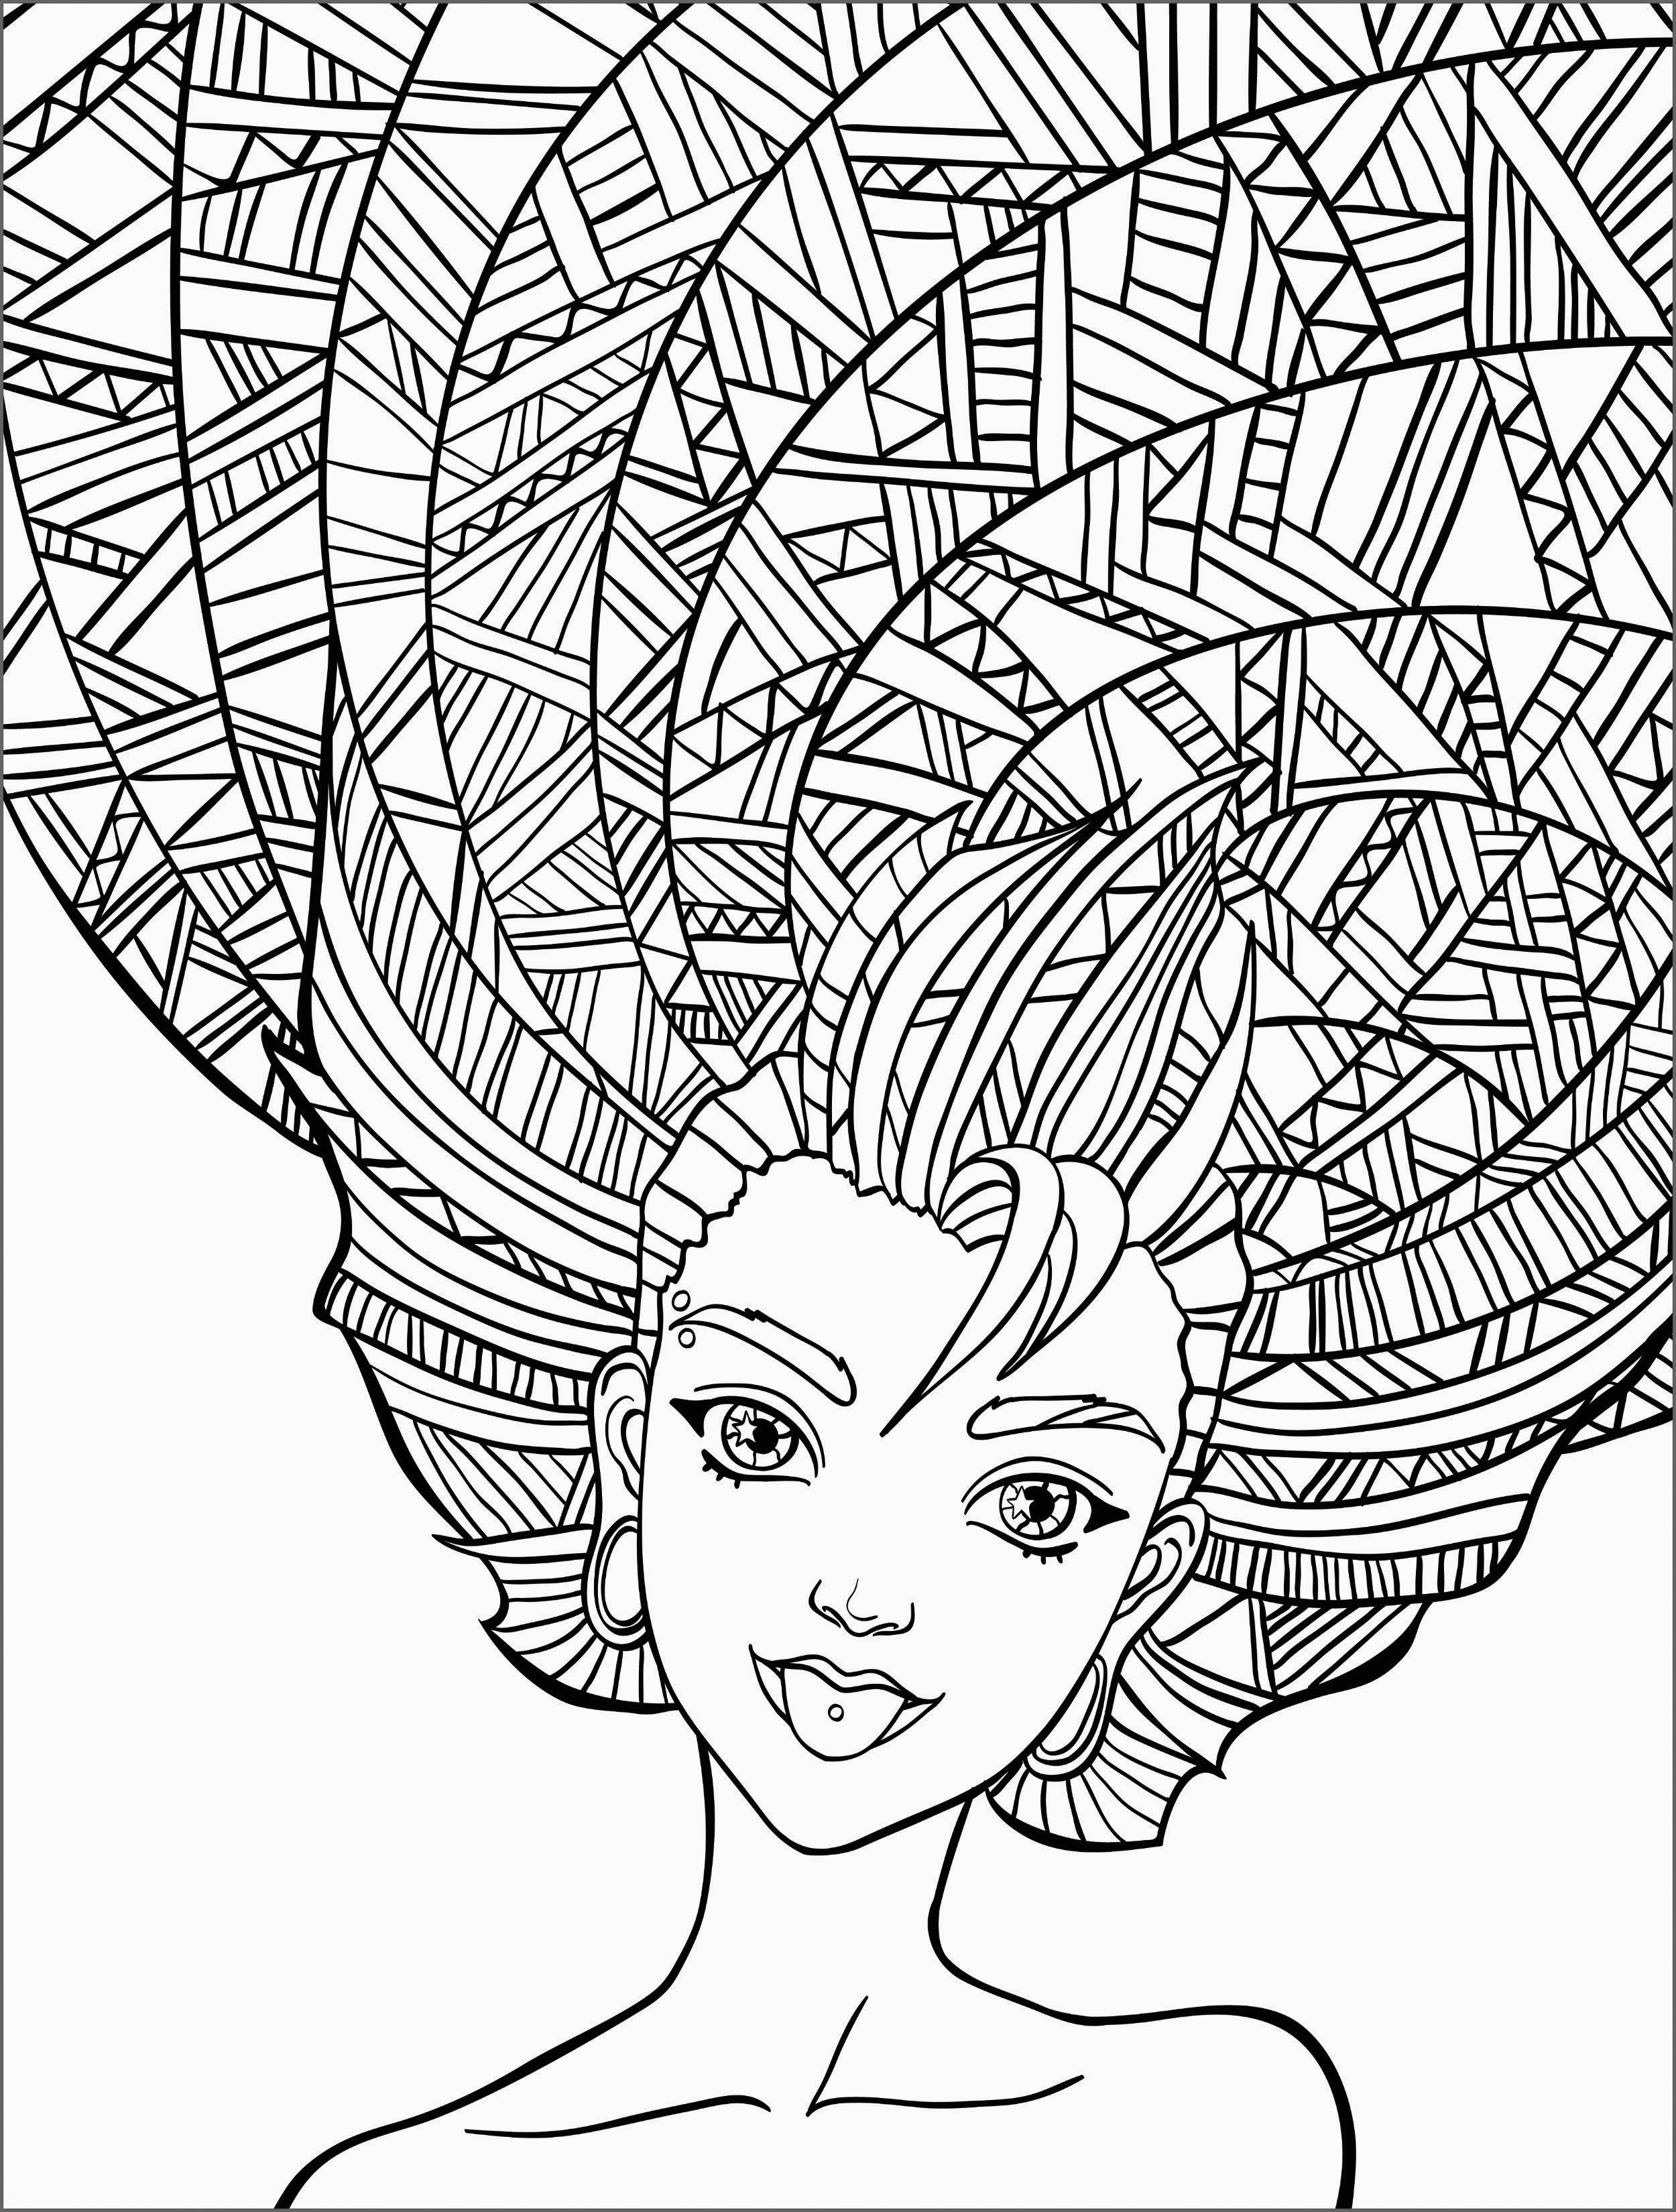 Coloring Pages for Adults - Best Coloring Pages For Kids